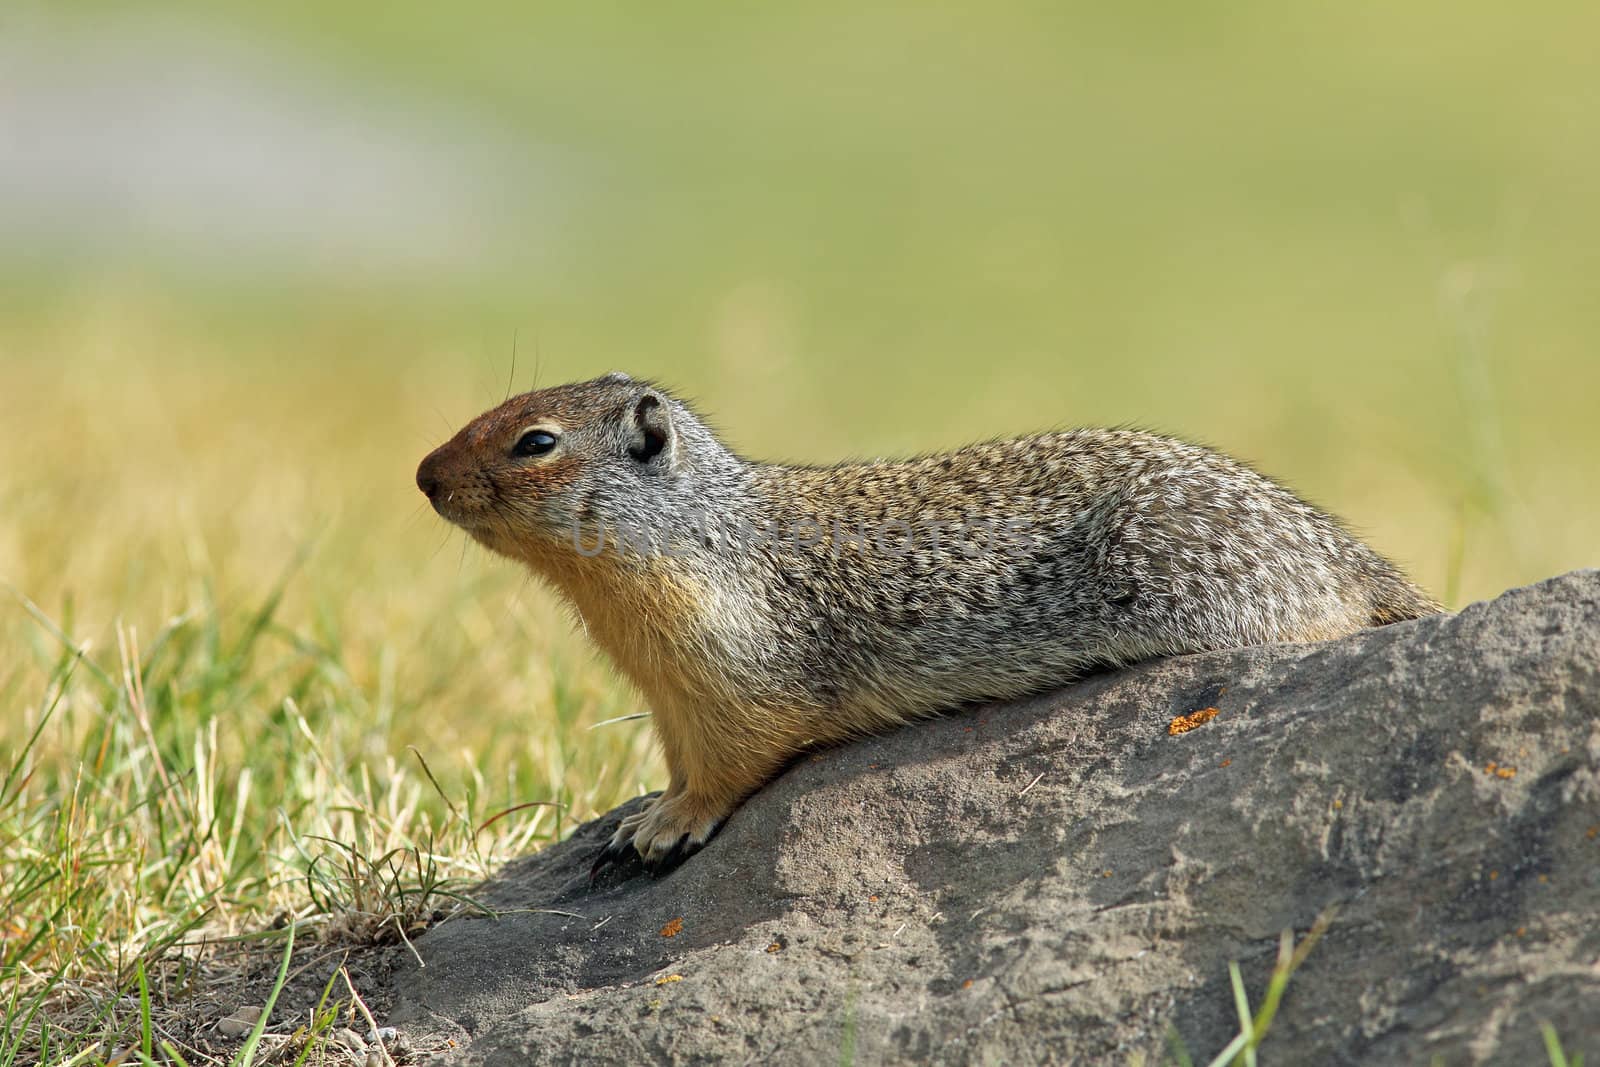 Columbian Ground Squirrel by gonepaddling